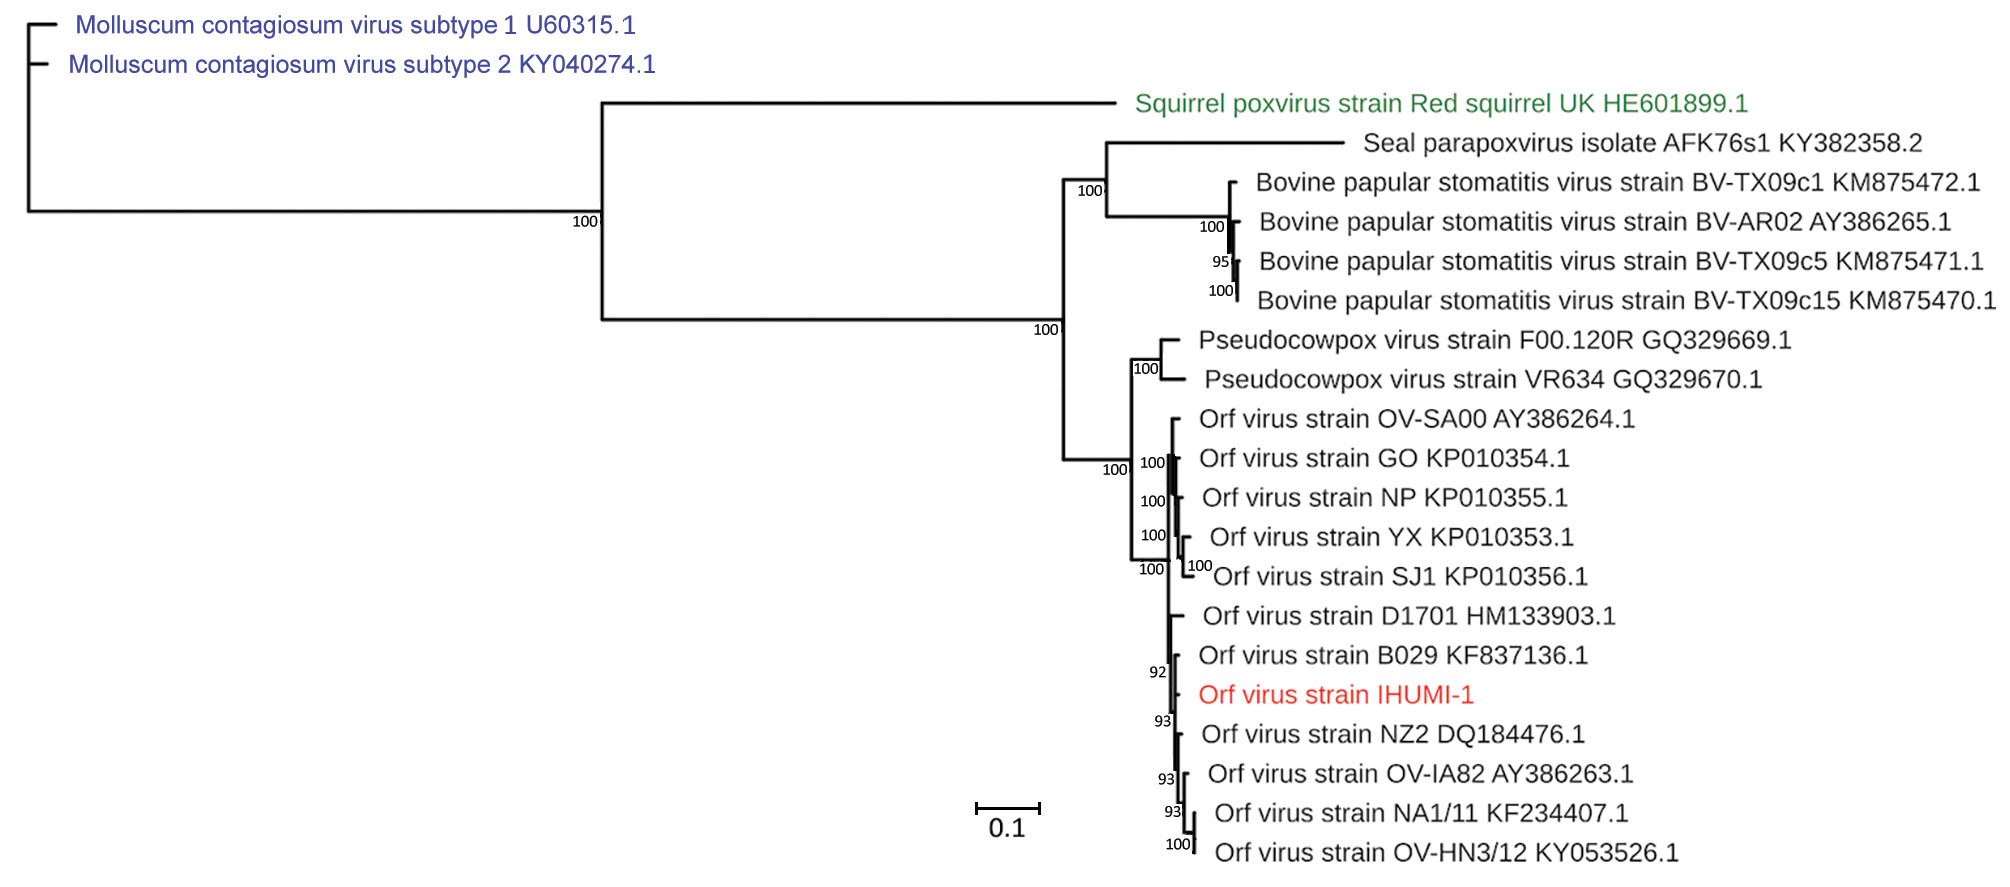 Maximum-likelihood tree based on complete sequences of orf virus IHUMI-1 from a 65-year-old woman in France (red) and 22 other viruses belonging to the family Poxviridae. Tree was constructed by using a general time-reversible model with 100 bootstrap replicates. All branches with bootstrap values &lt;70 were collapsed. Numbers along branches are bootstrap values. Blue indicates 2 chordopoxviruses that served as outgroups, and green indicates a squirrel poxvirus still unclassified but related to